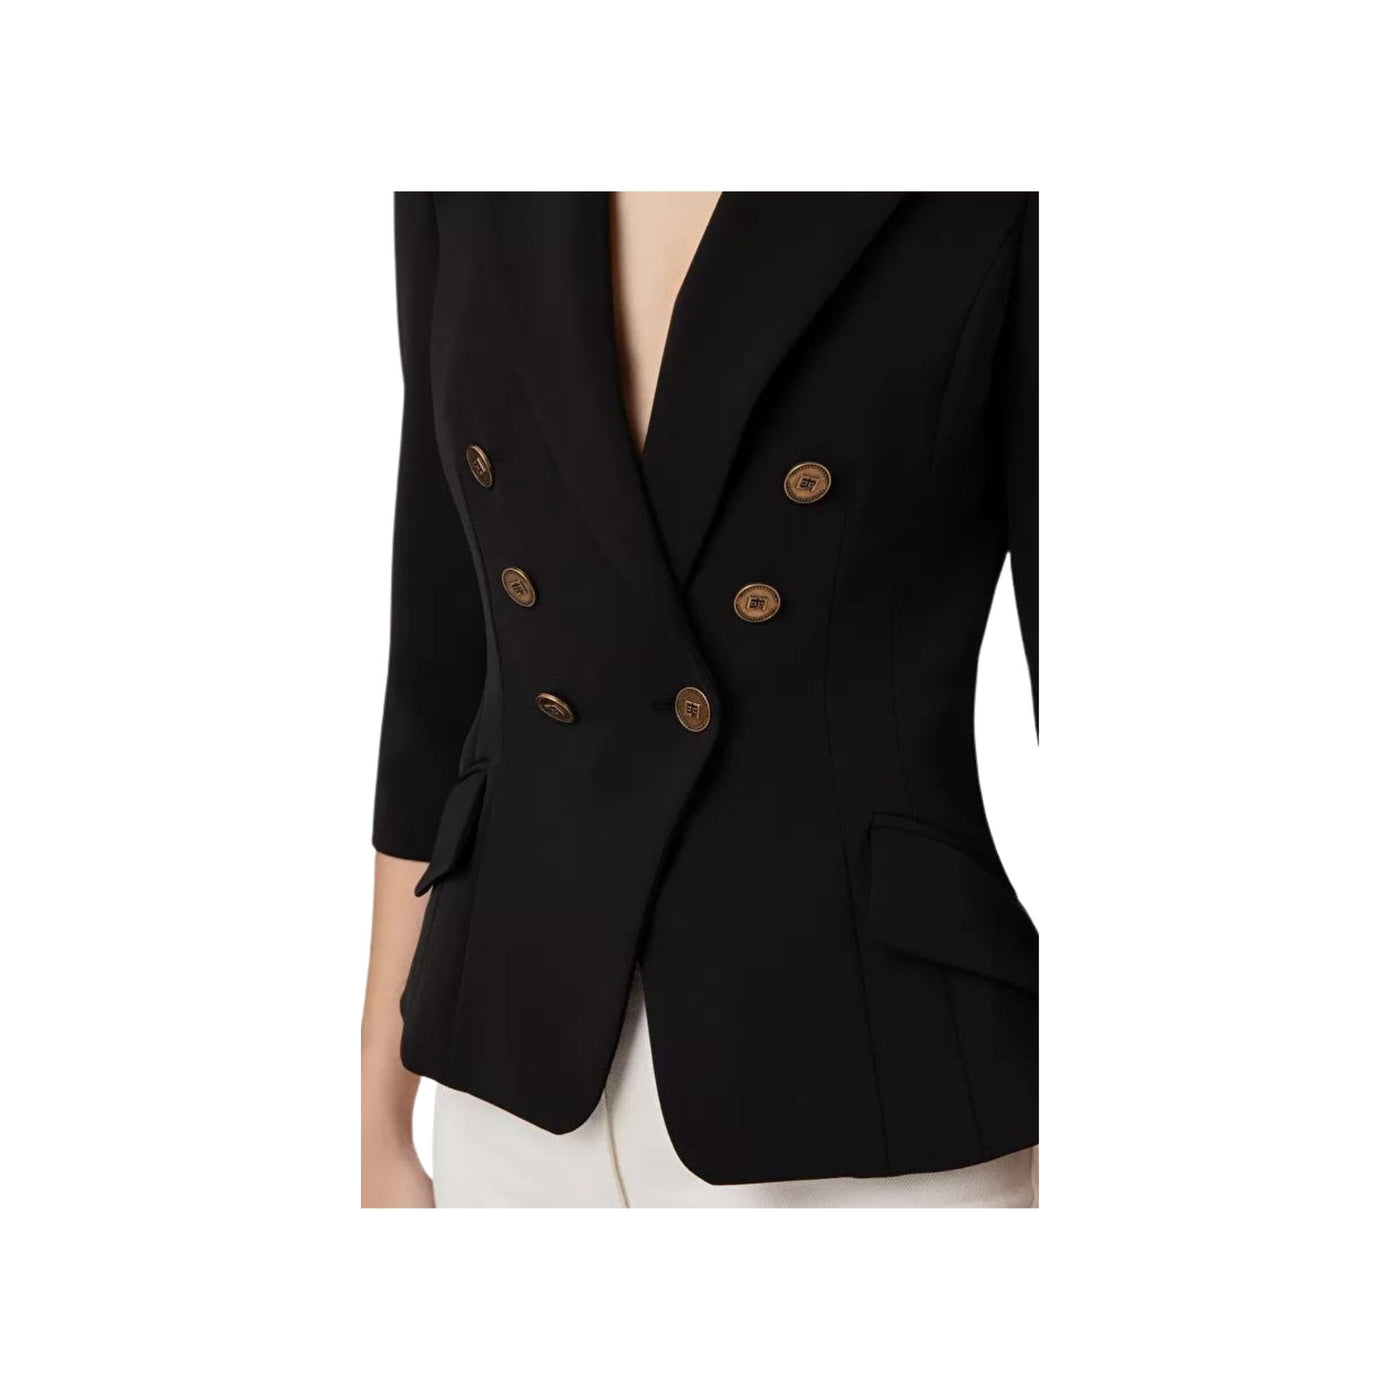 Women's jacket with double-breasted closure